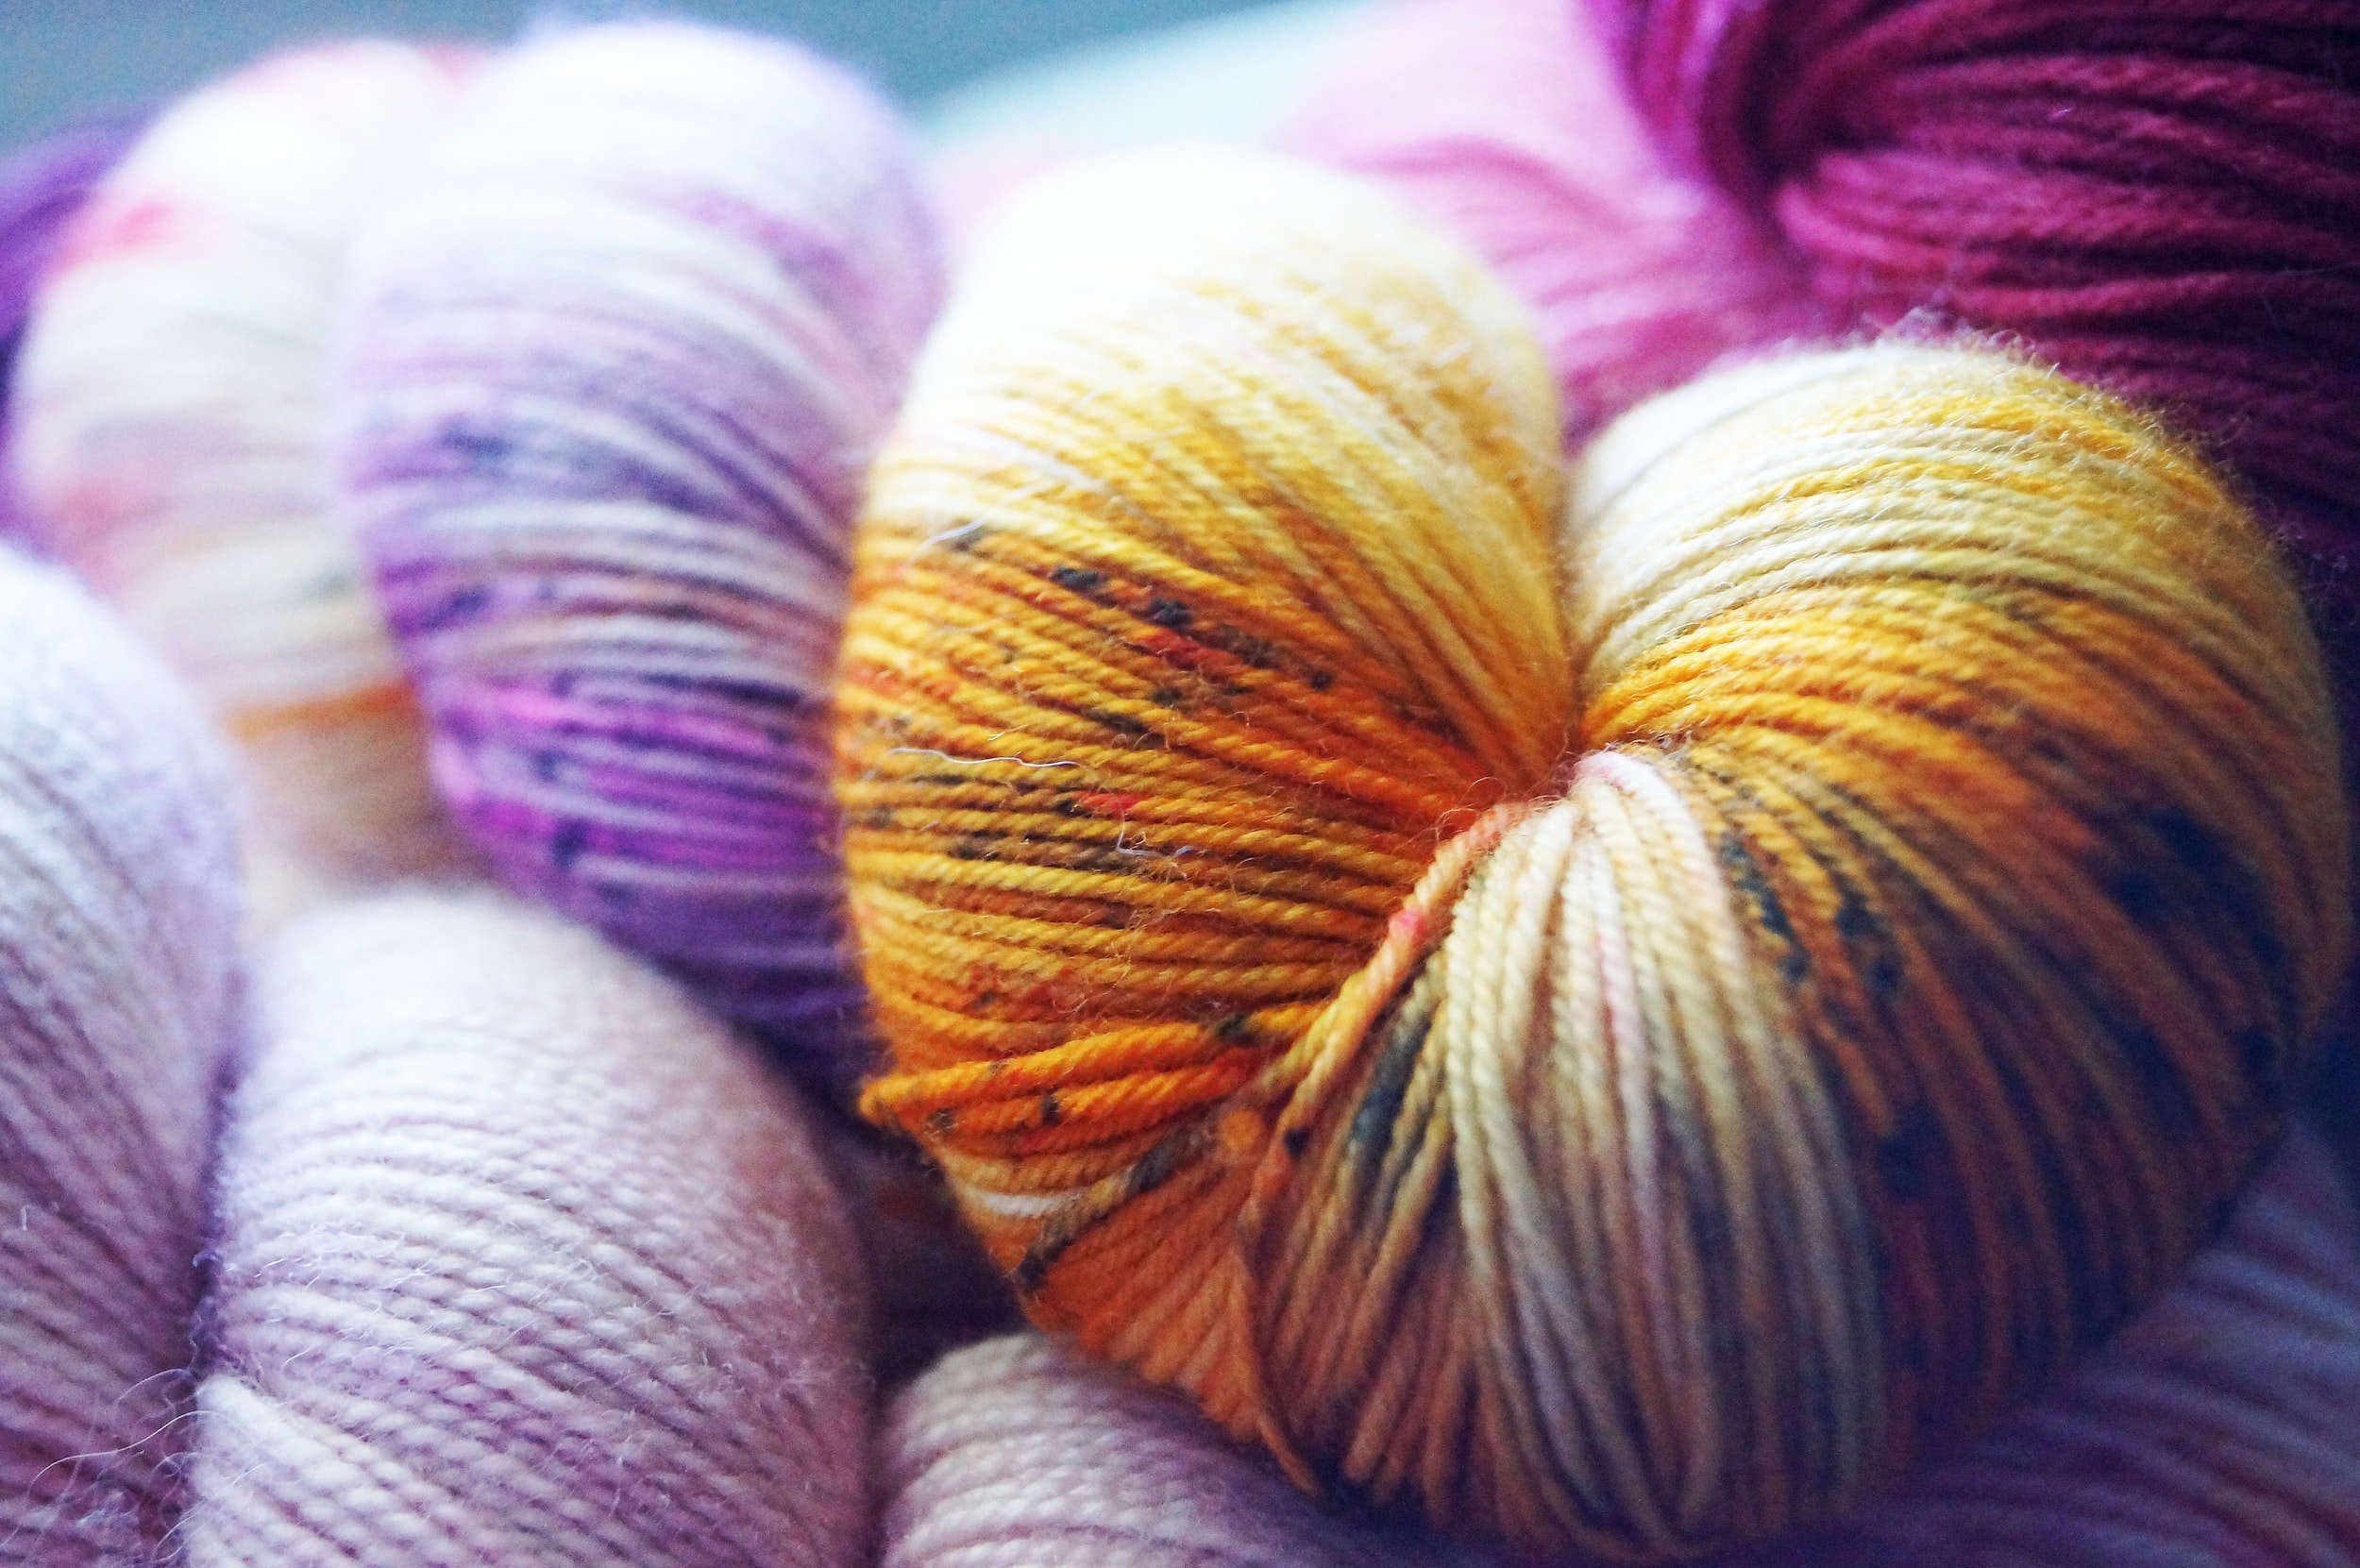 Knitting on a Budget: 3 Tips to Make Knitting More Affordable